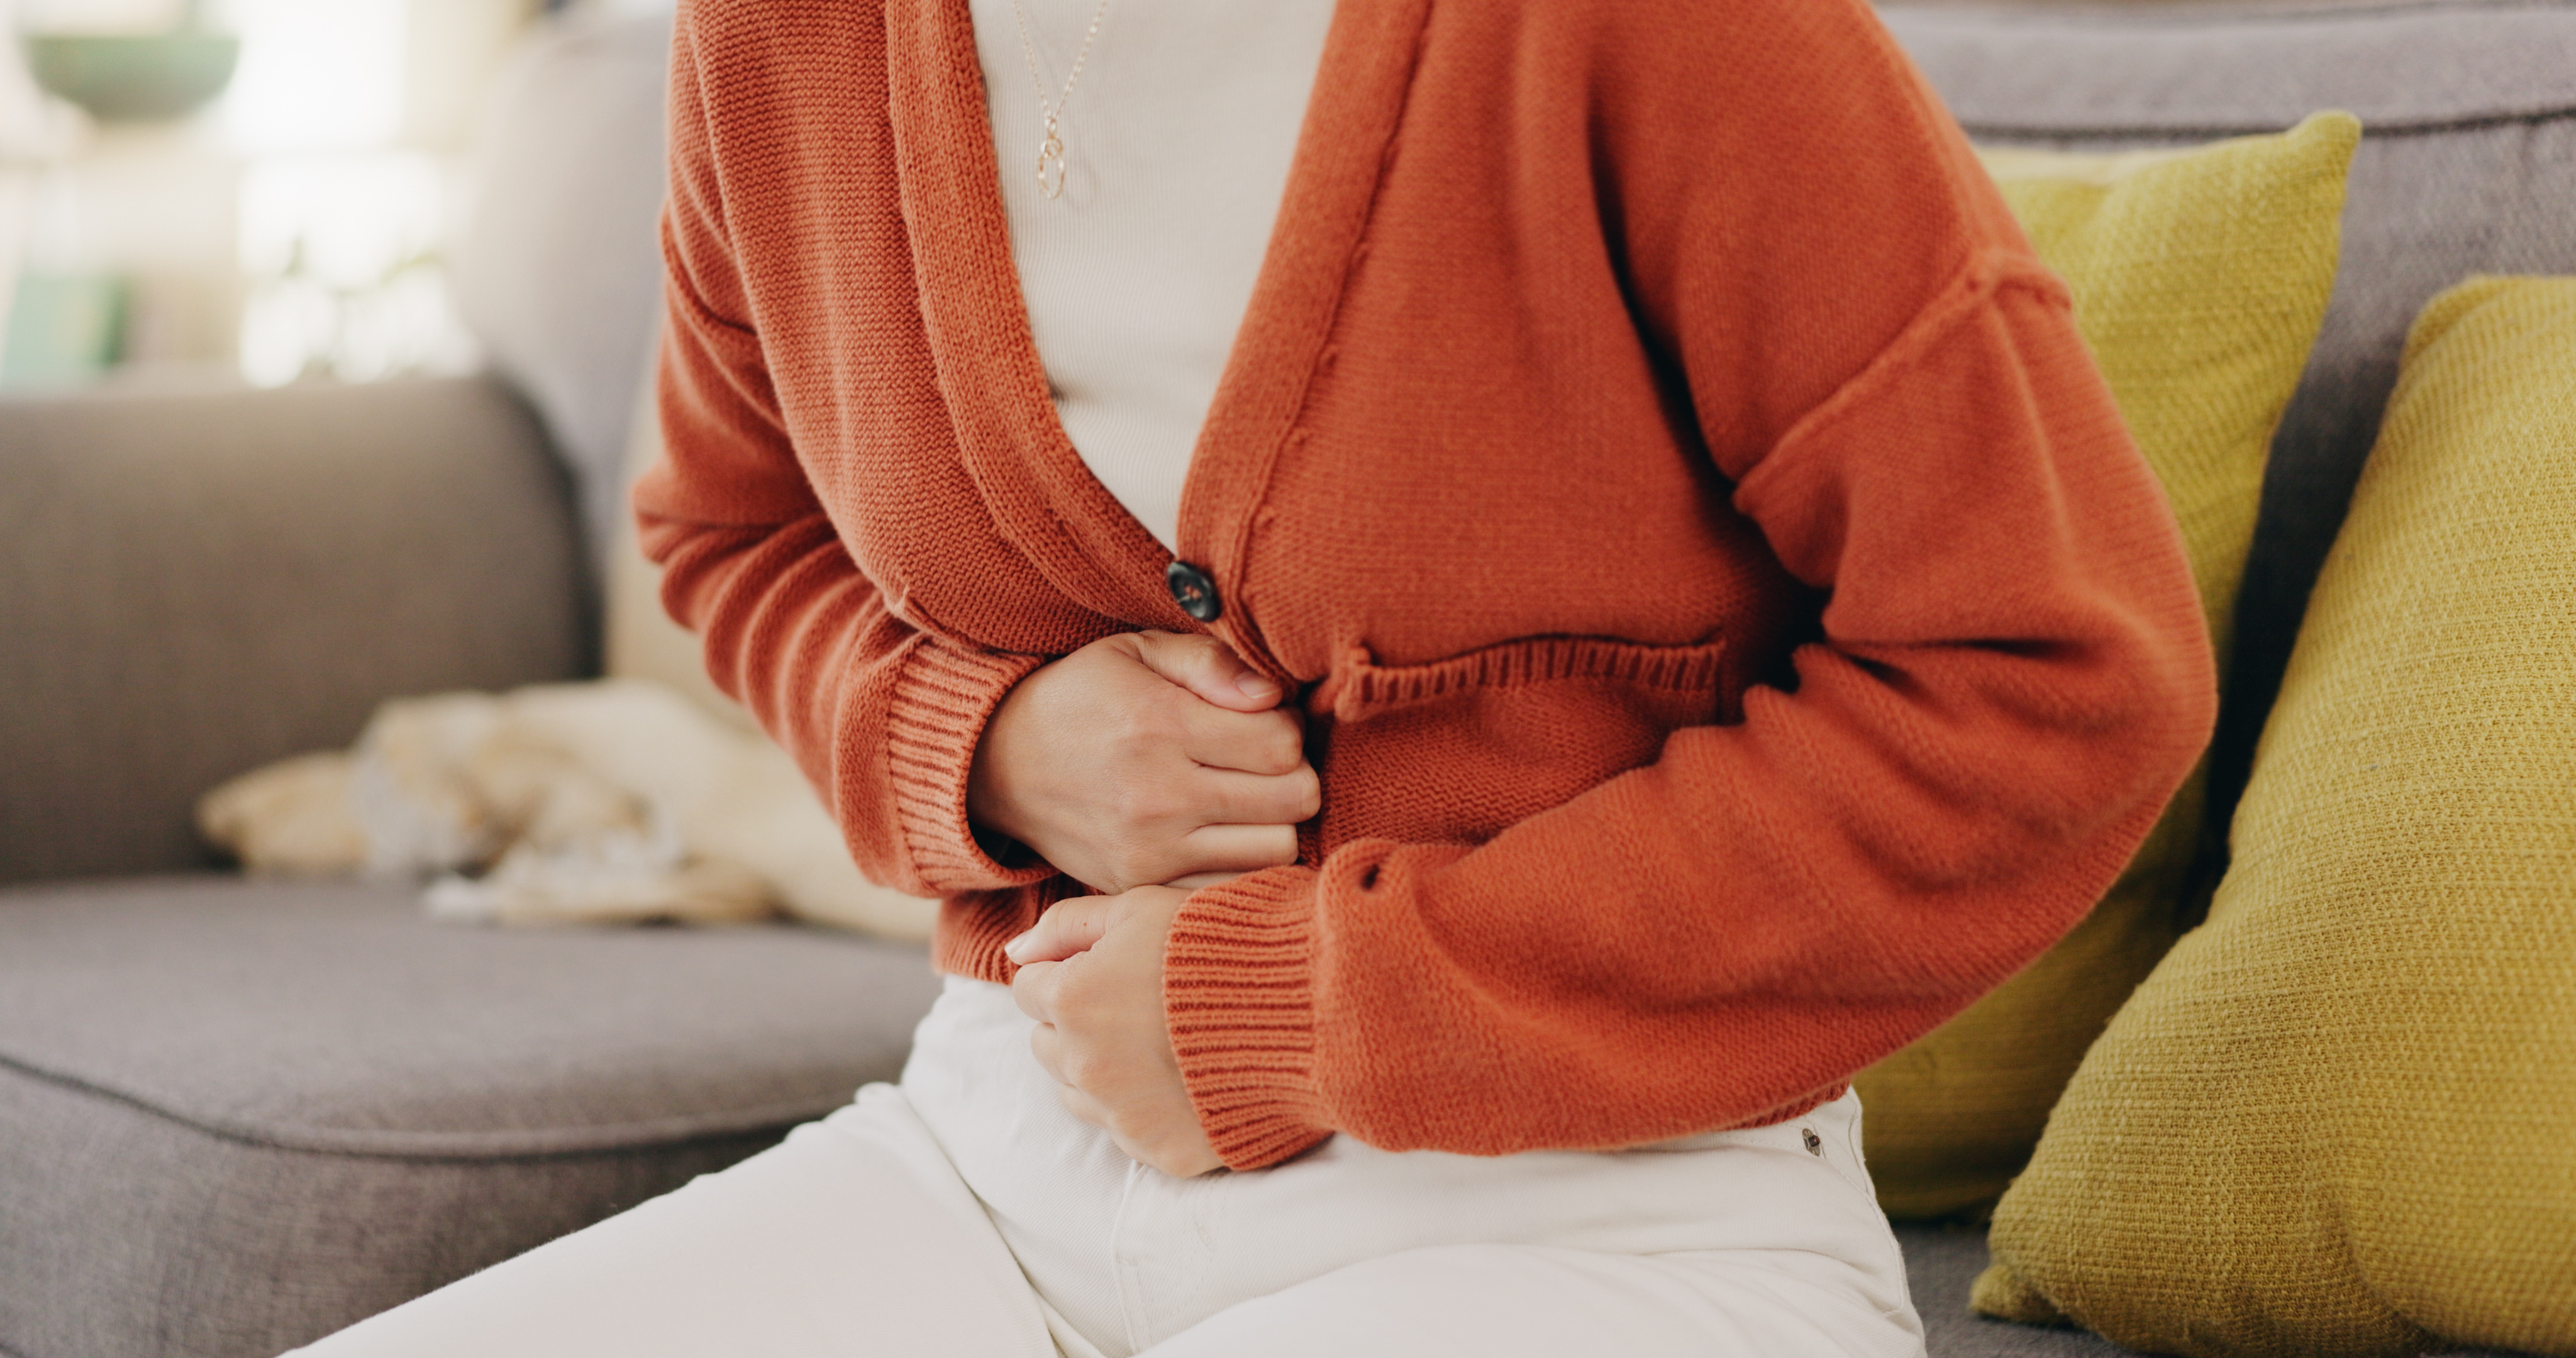 A woman experiencing stomach pain - learn how you can find relief with Vida-Flo's IV hydration treatment for gastrointestinal diseases in Decatur, GA.